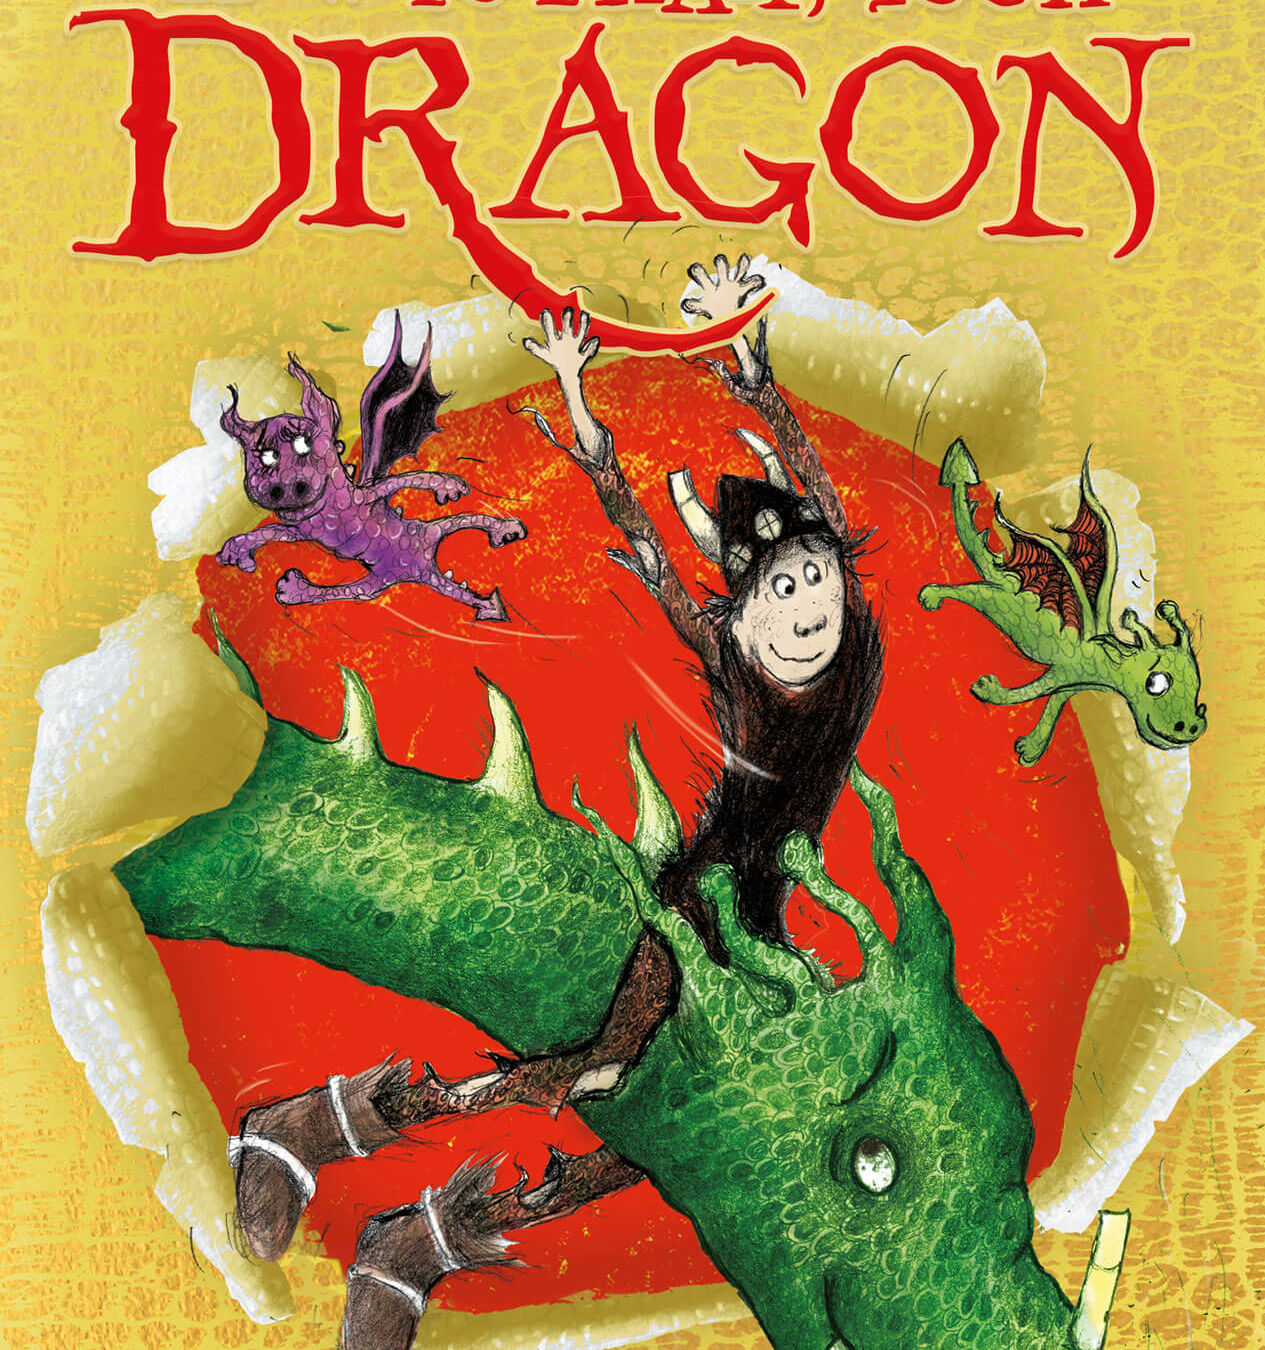 Book jacket for the 20th anniversary special edition of How to train your Dragon by Cressida Cowell